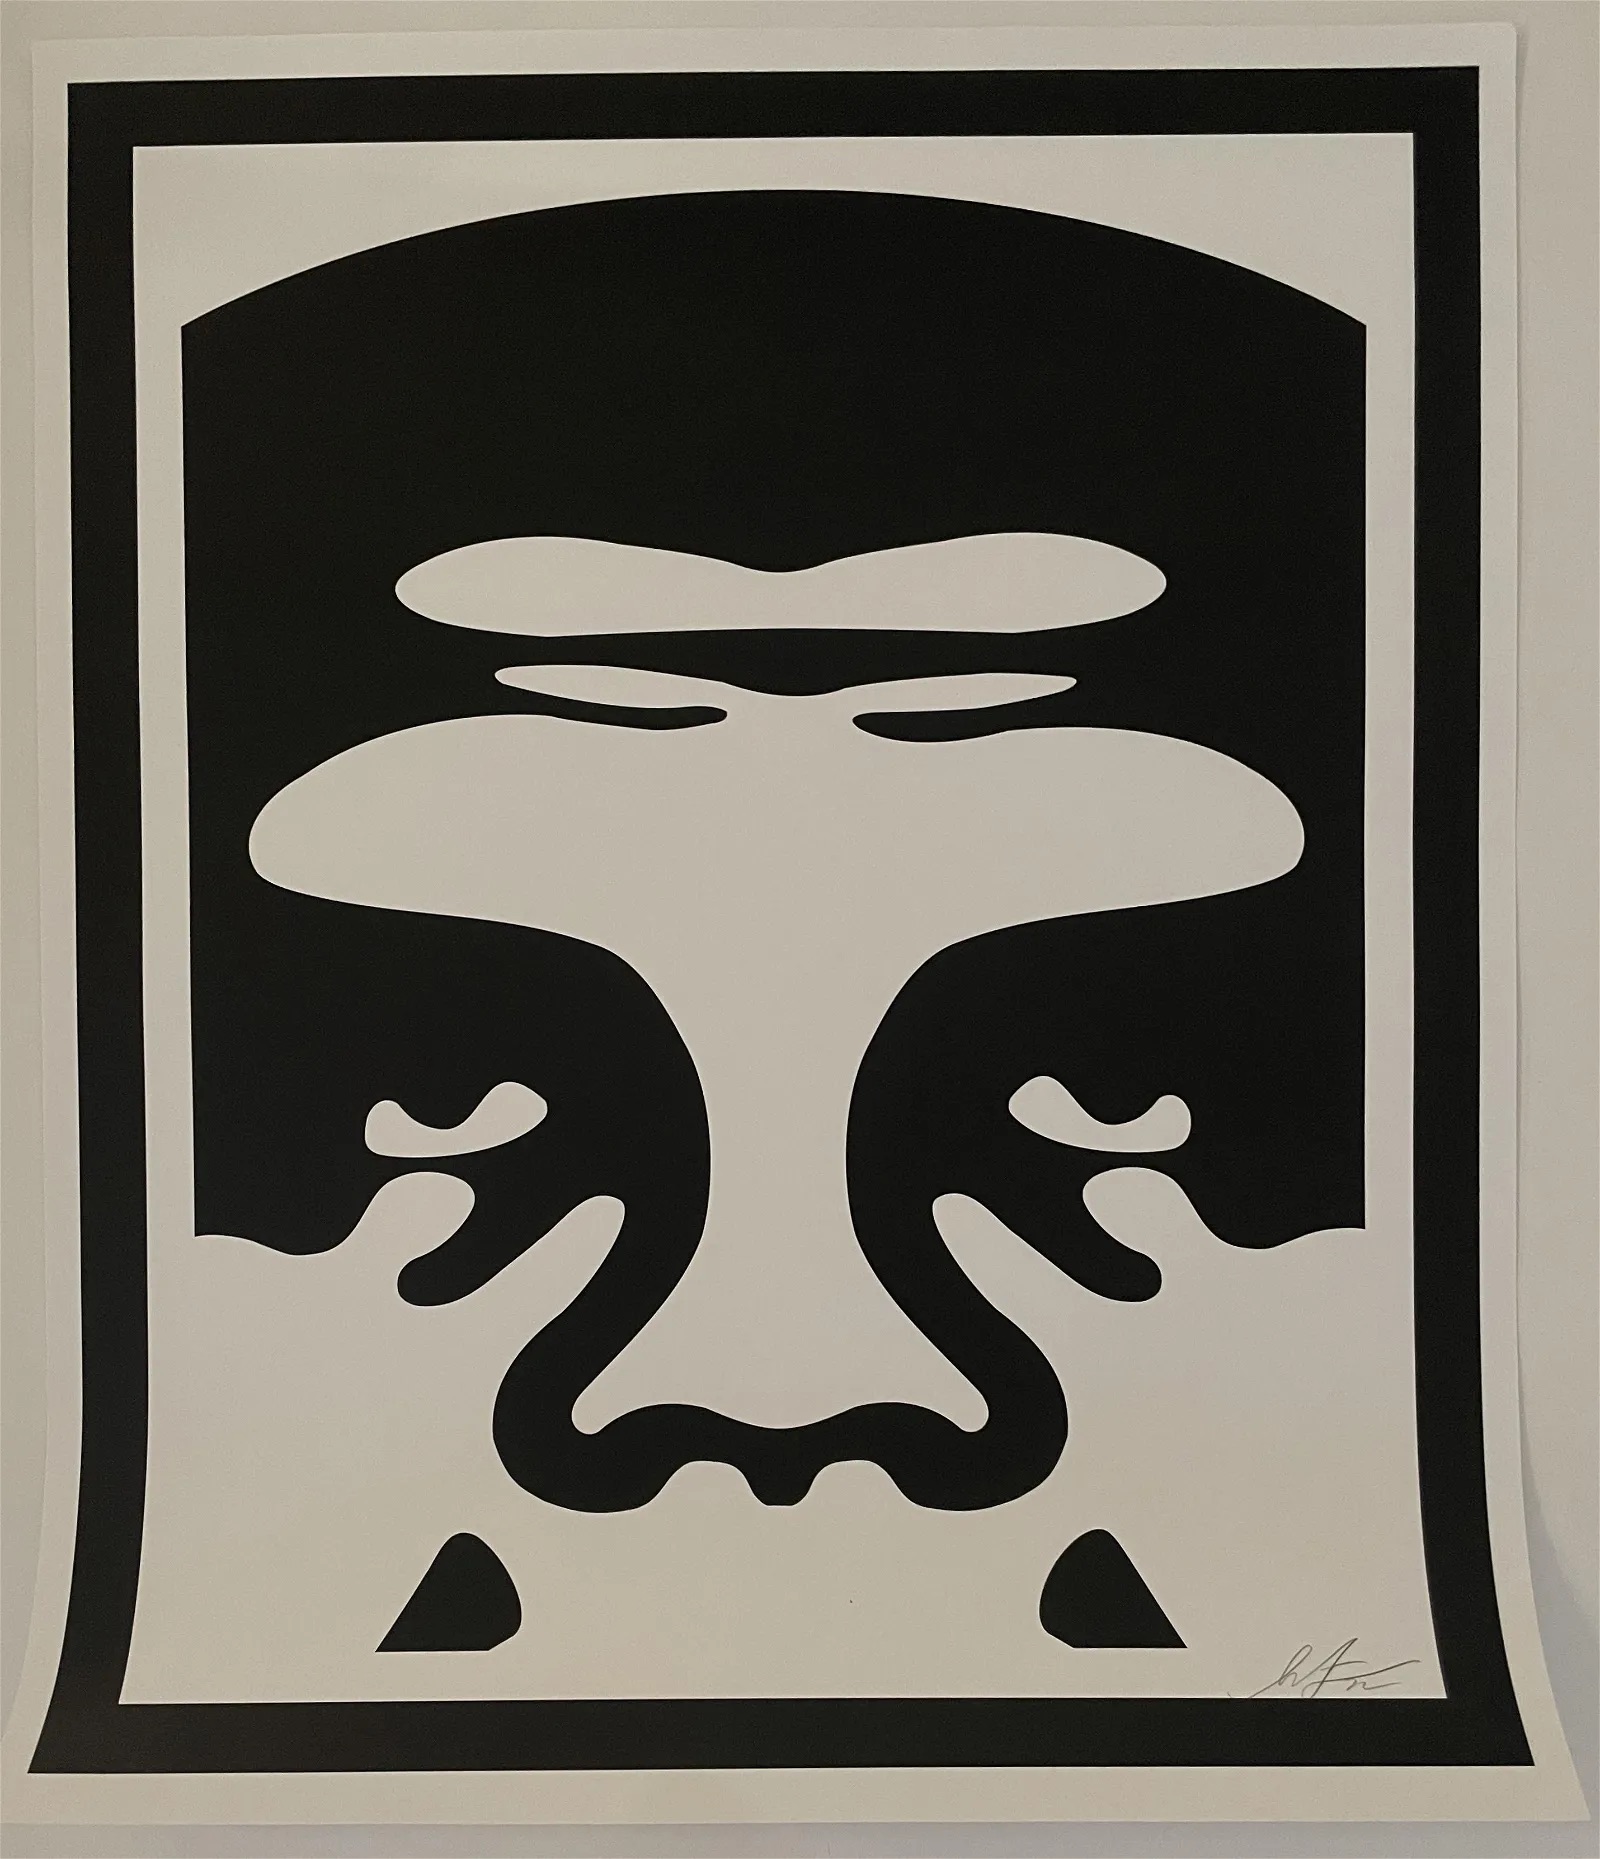 Shepard Fairey Signed "White Face" Offset Lithograph